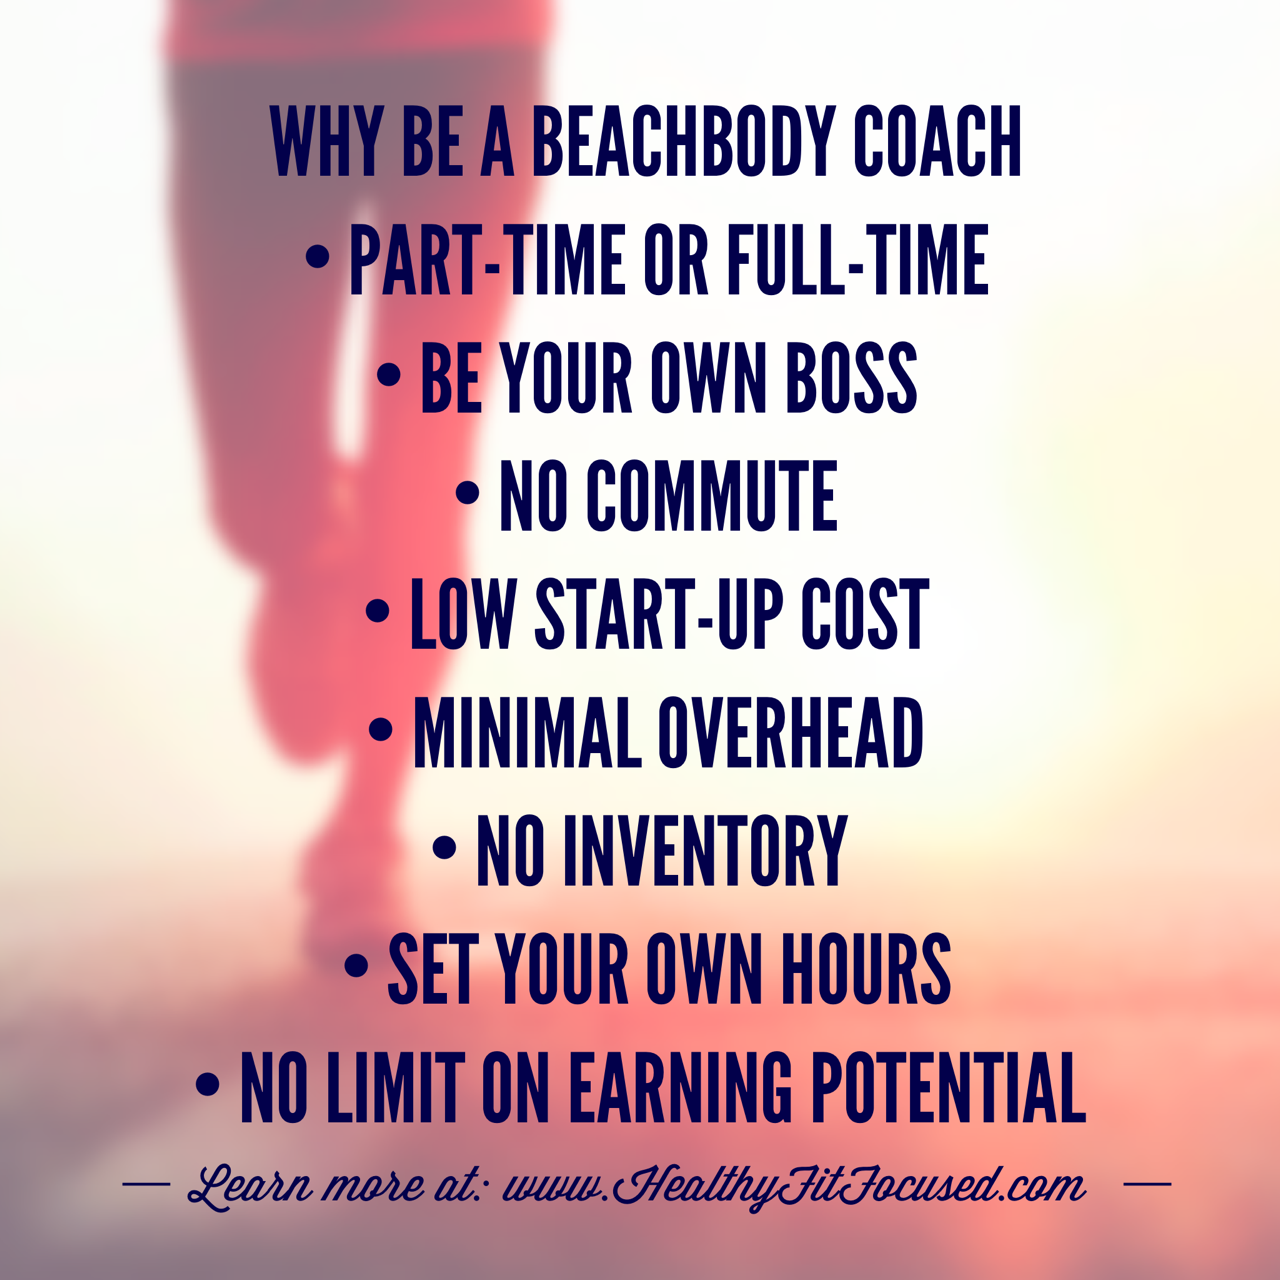 Why Be a Beachbody Coach?  Beachbody Coaching, Helping coaches become successful!  I'm looking for 5 highly motivated people ready to earn a significant income by helping others. www.HealthyFitFocused.com 